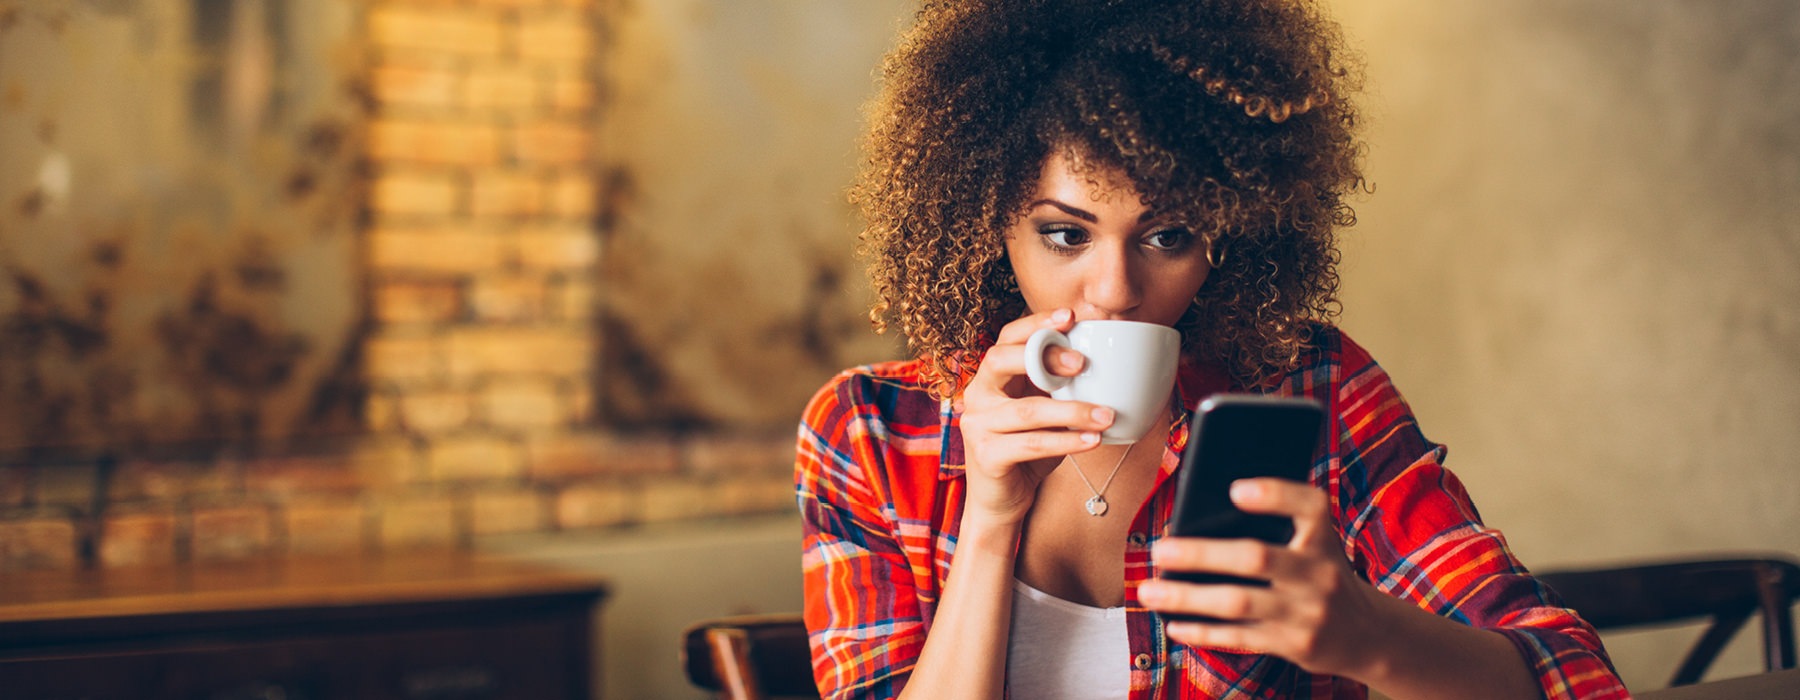 Woman drinking coffee while on phone.